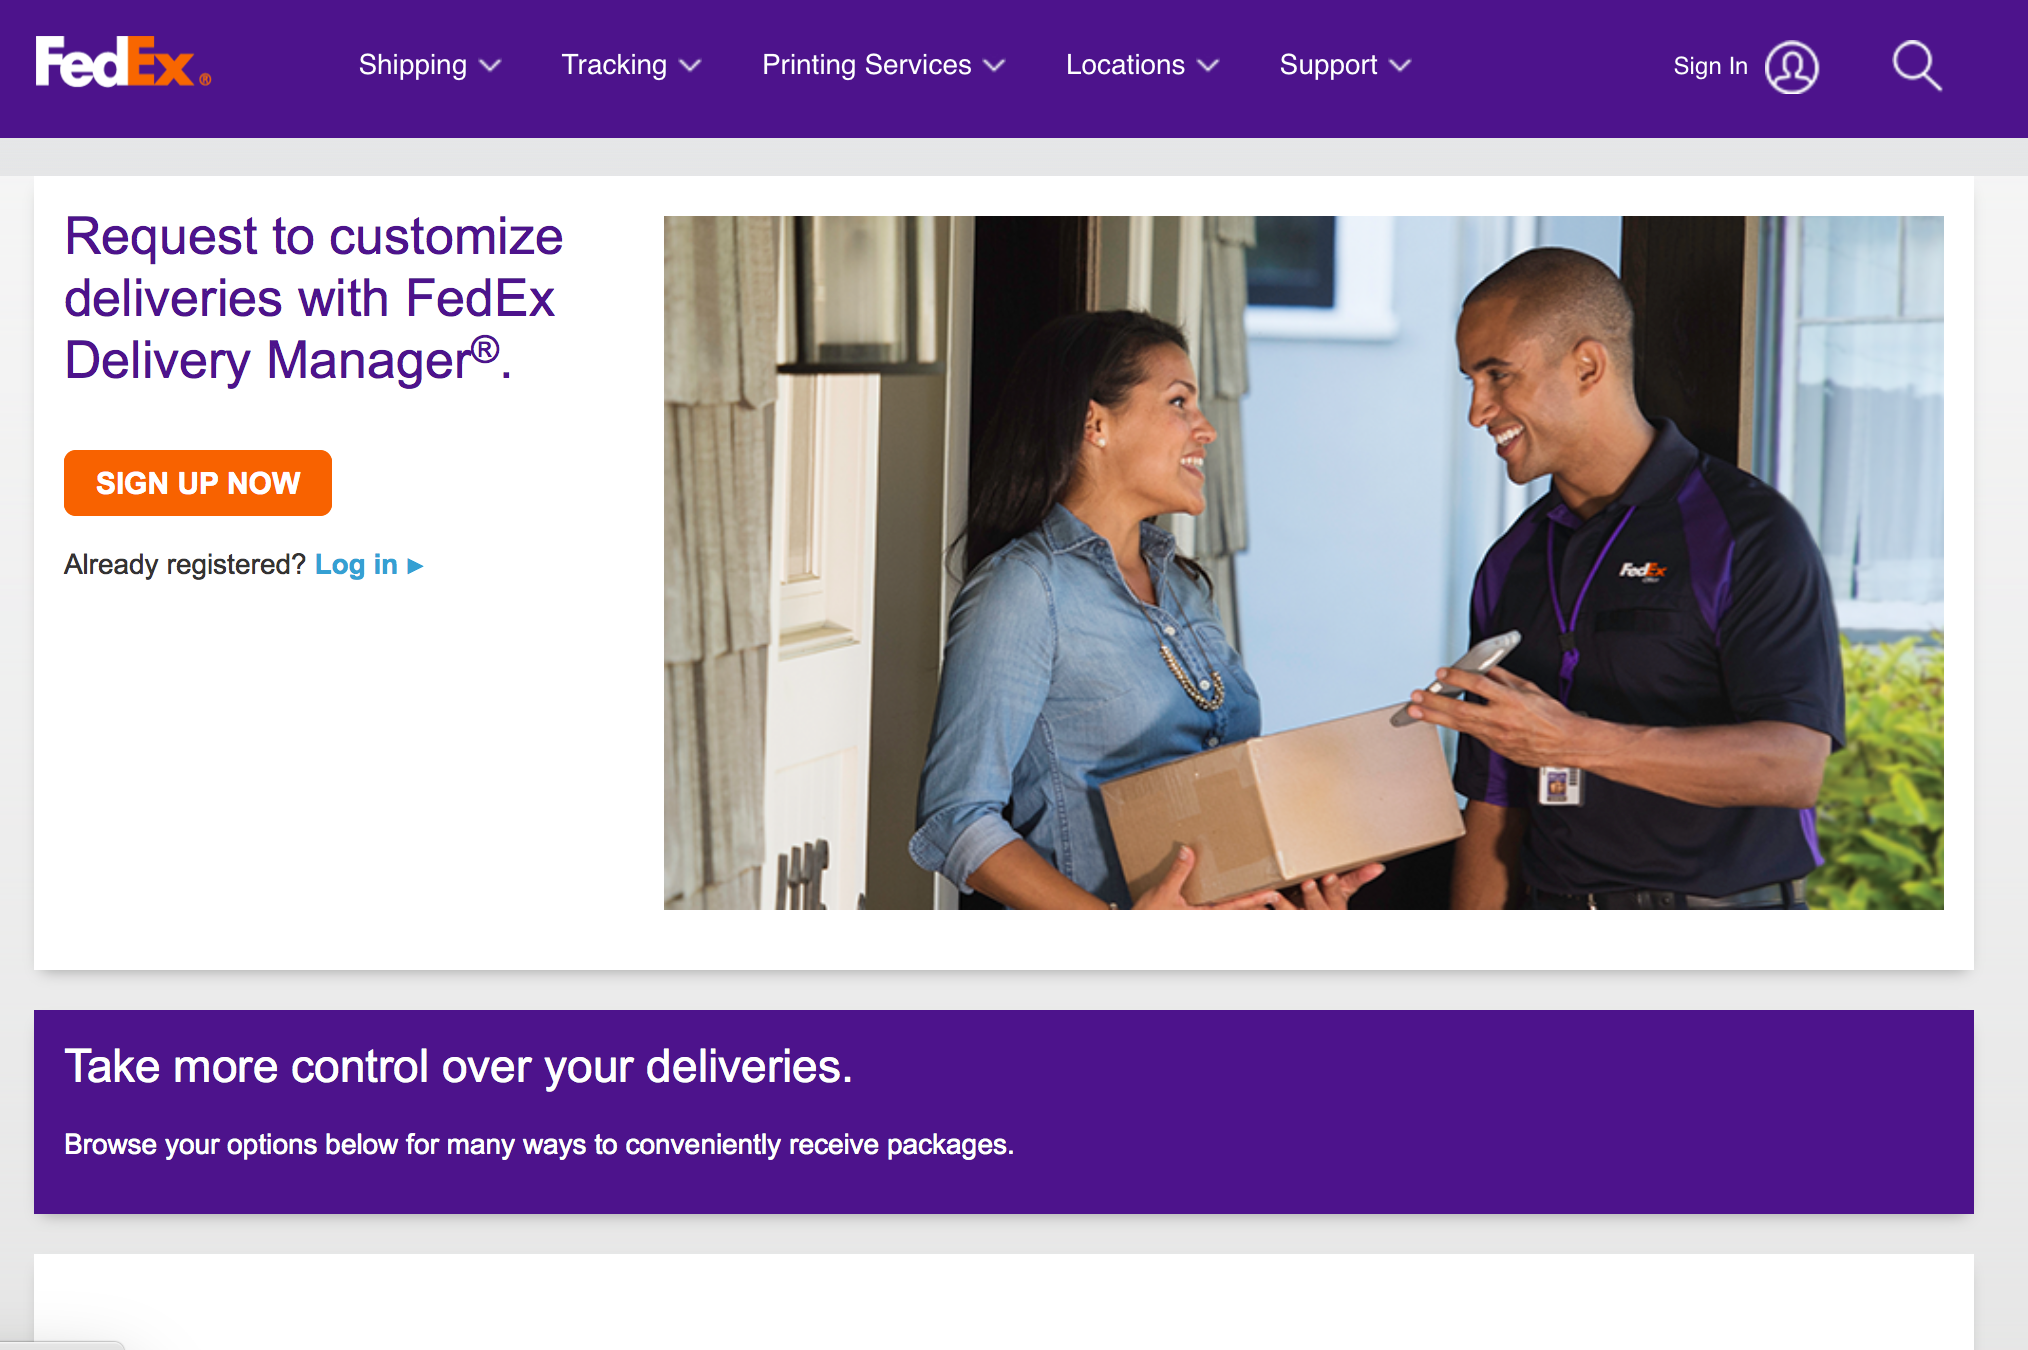 Delivery manager. Руководство FEDEX. FEDEX Manager. Деливери менеджер. Delivery Manager кто это.